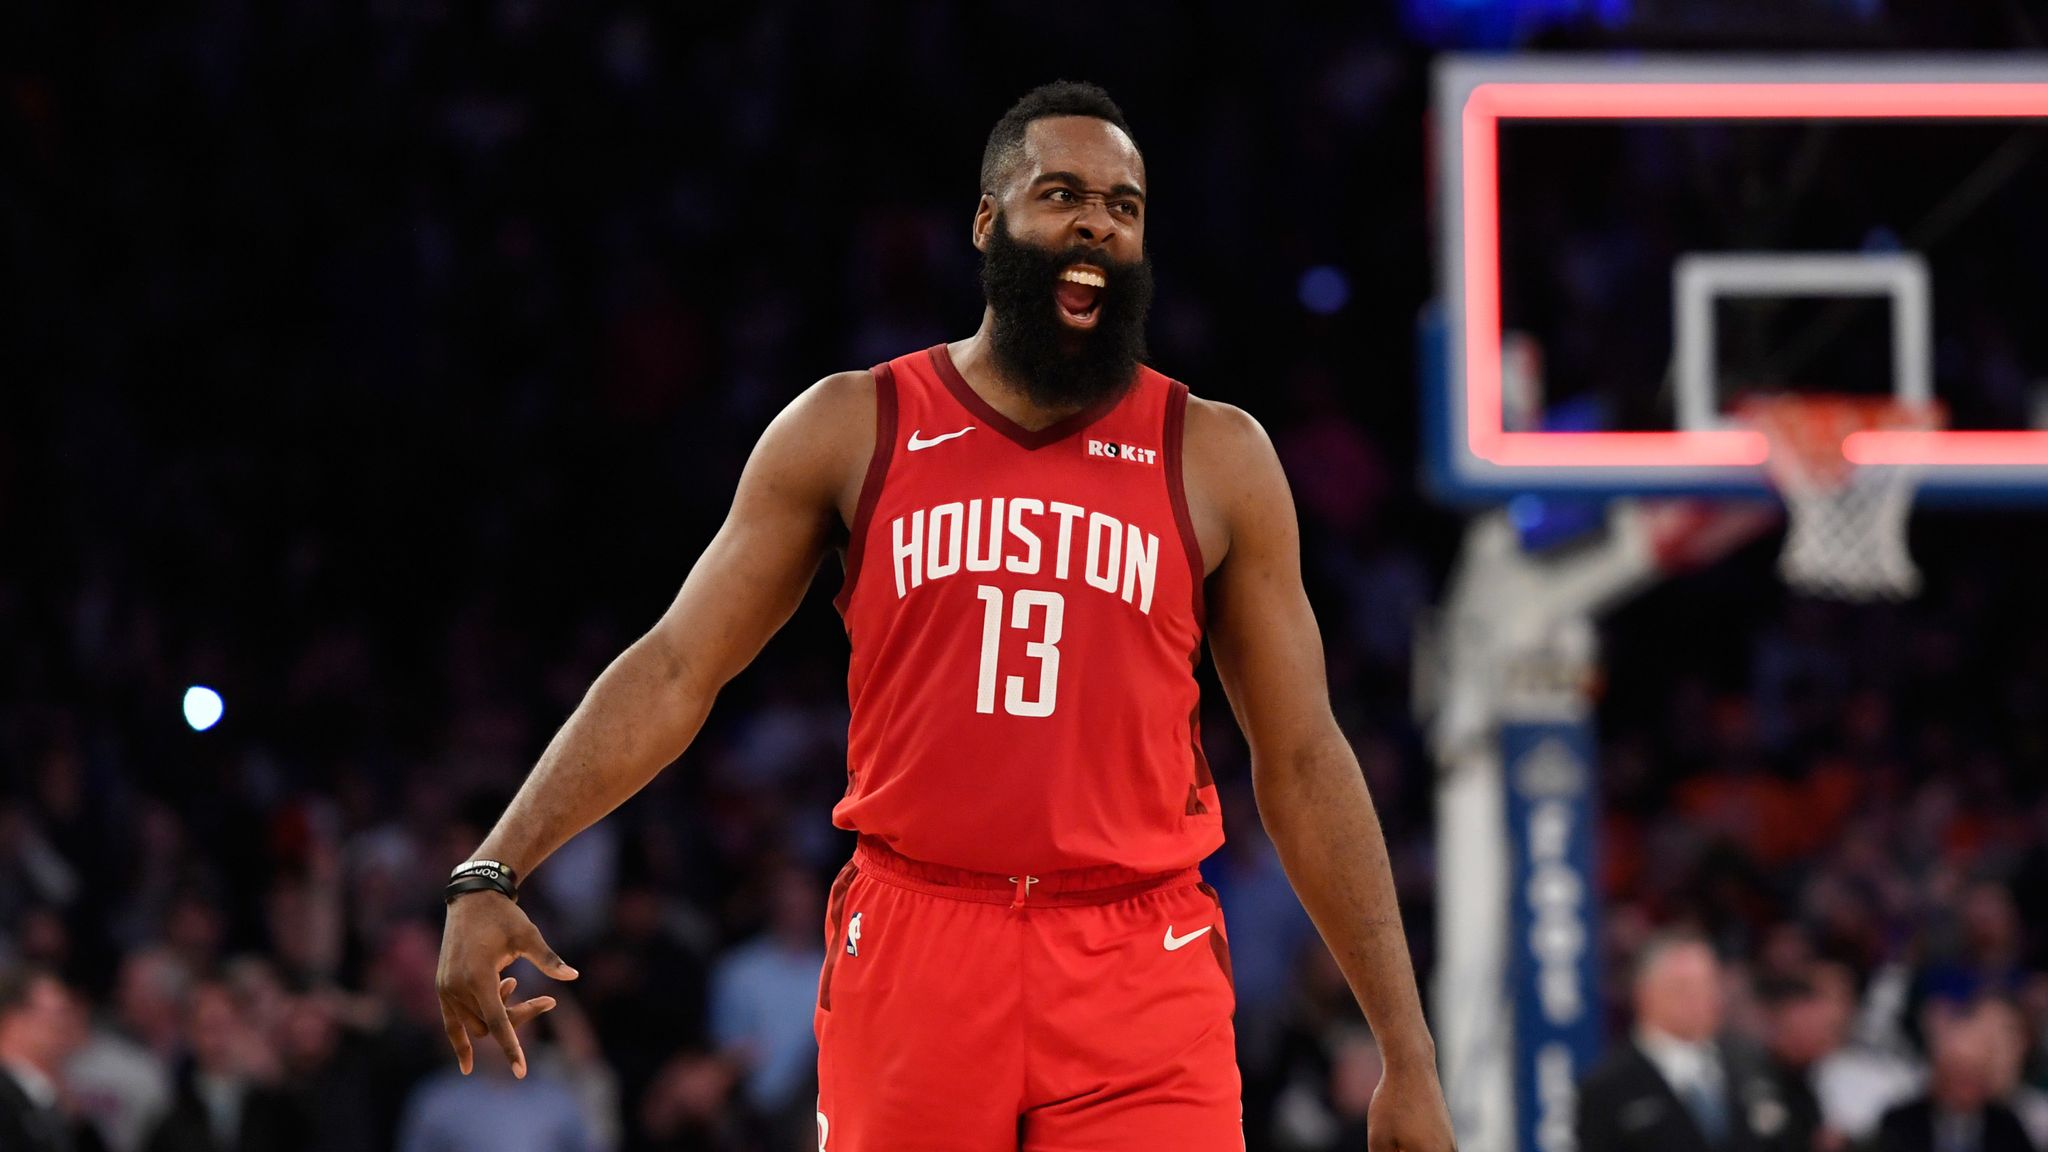 James Harden scores 61 points to lead Houston Rockets to victory